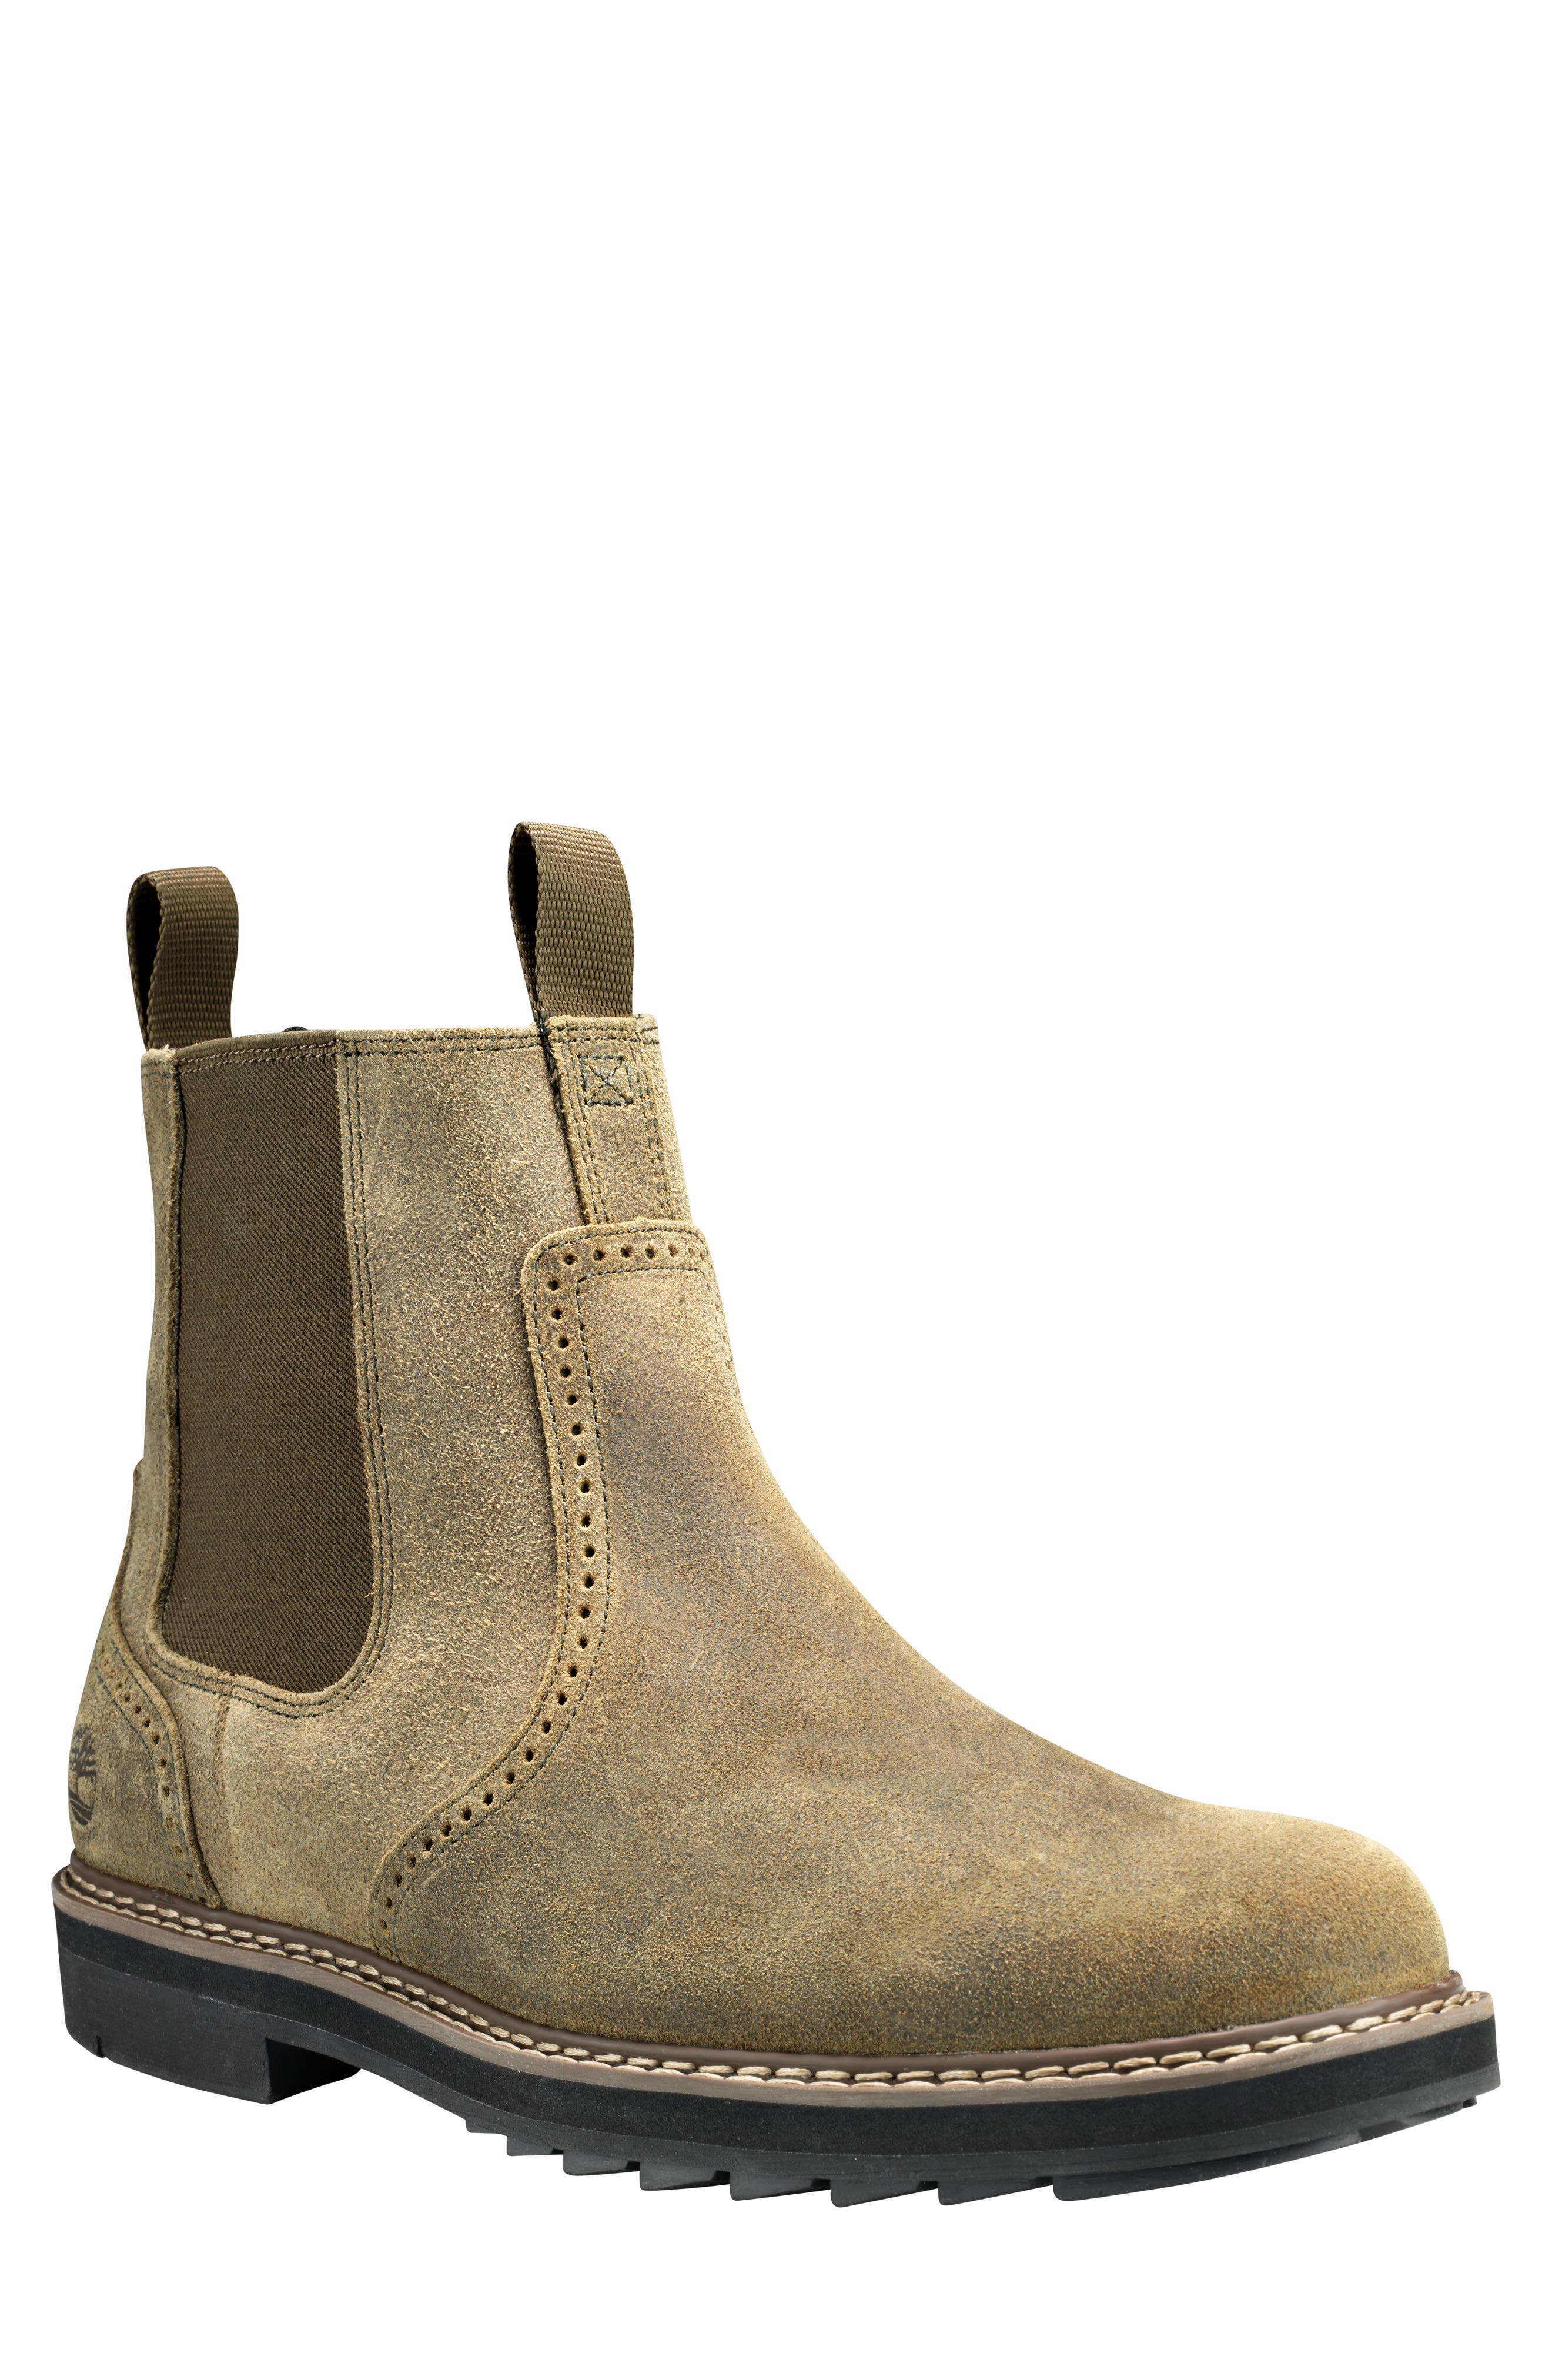 Squall Canyon Waterproof Chelsea Boot 